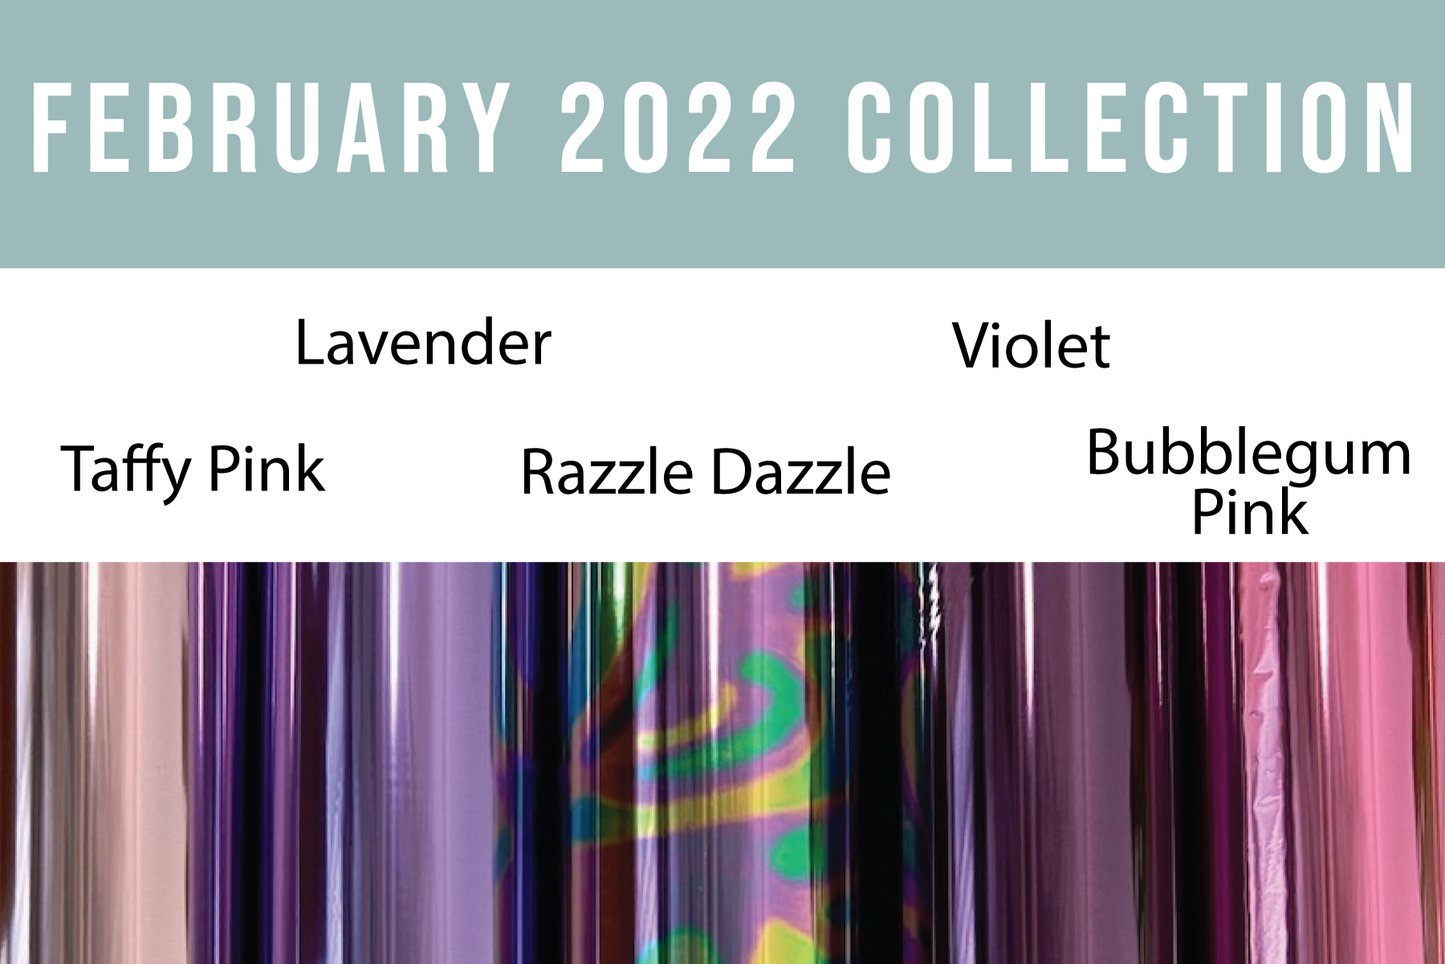 February 2022 Foil Club Collection